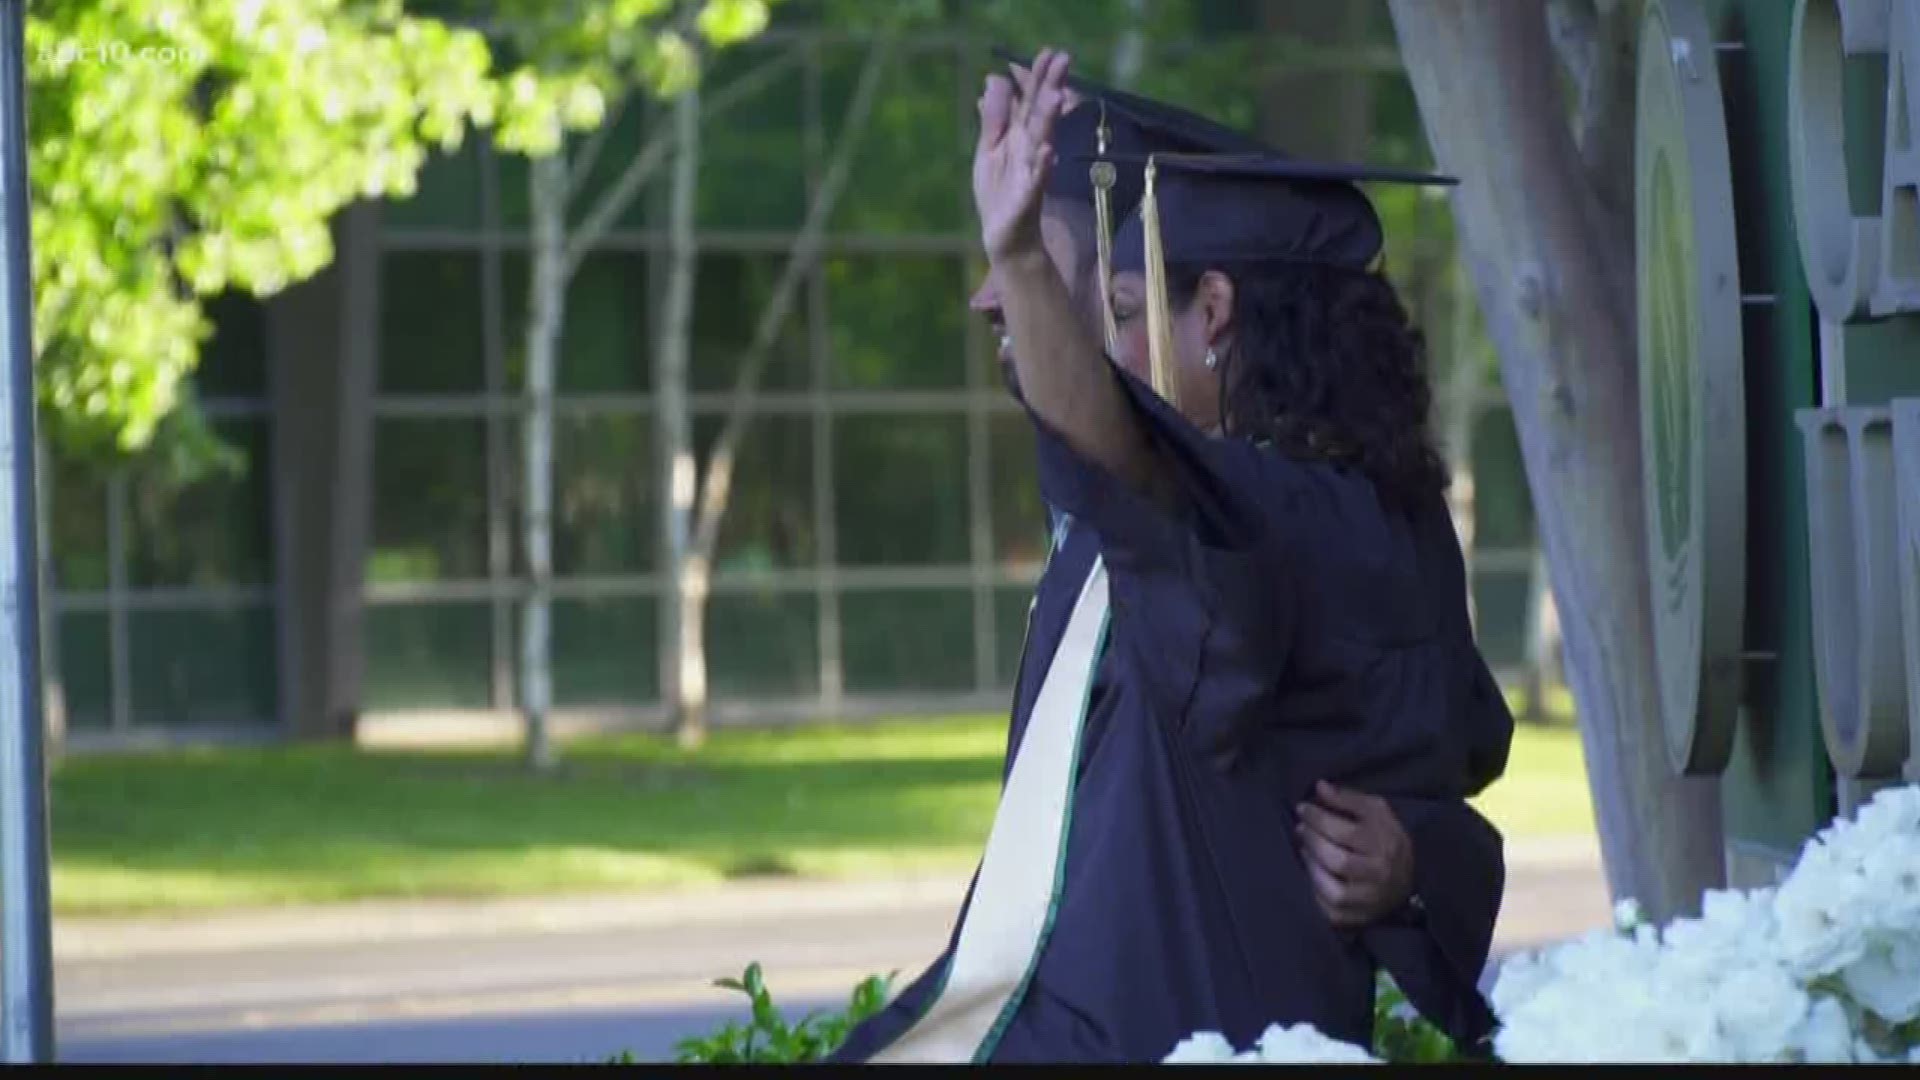 61-year-old mom graduates from college with youngest son (May 11, 2018)